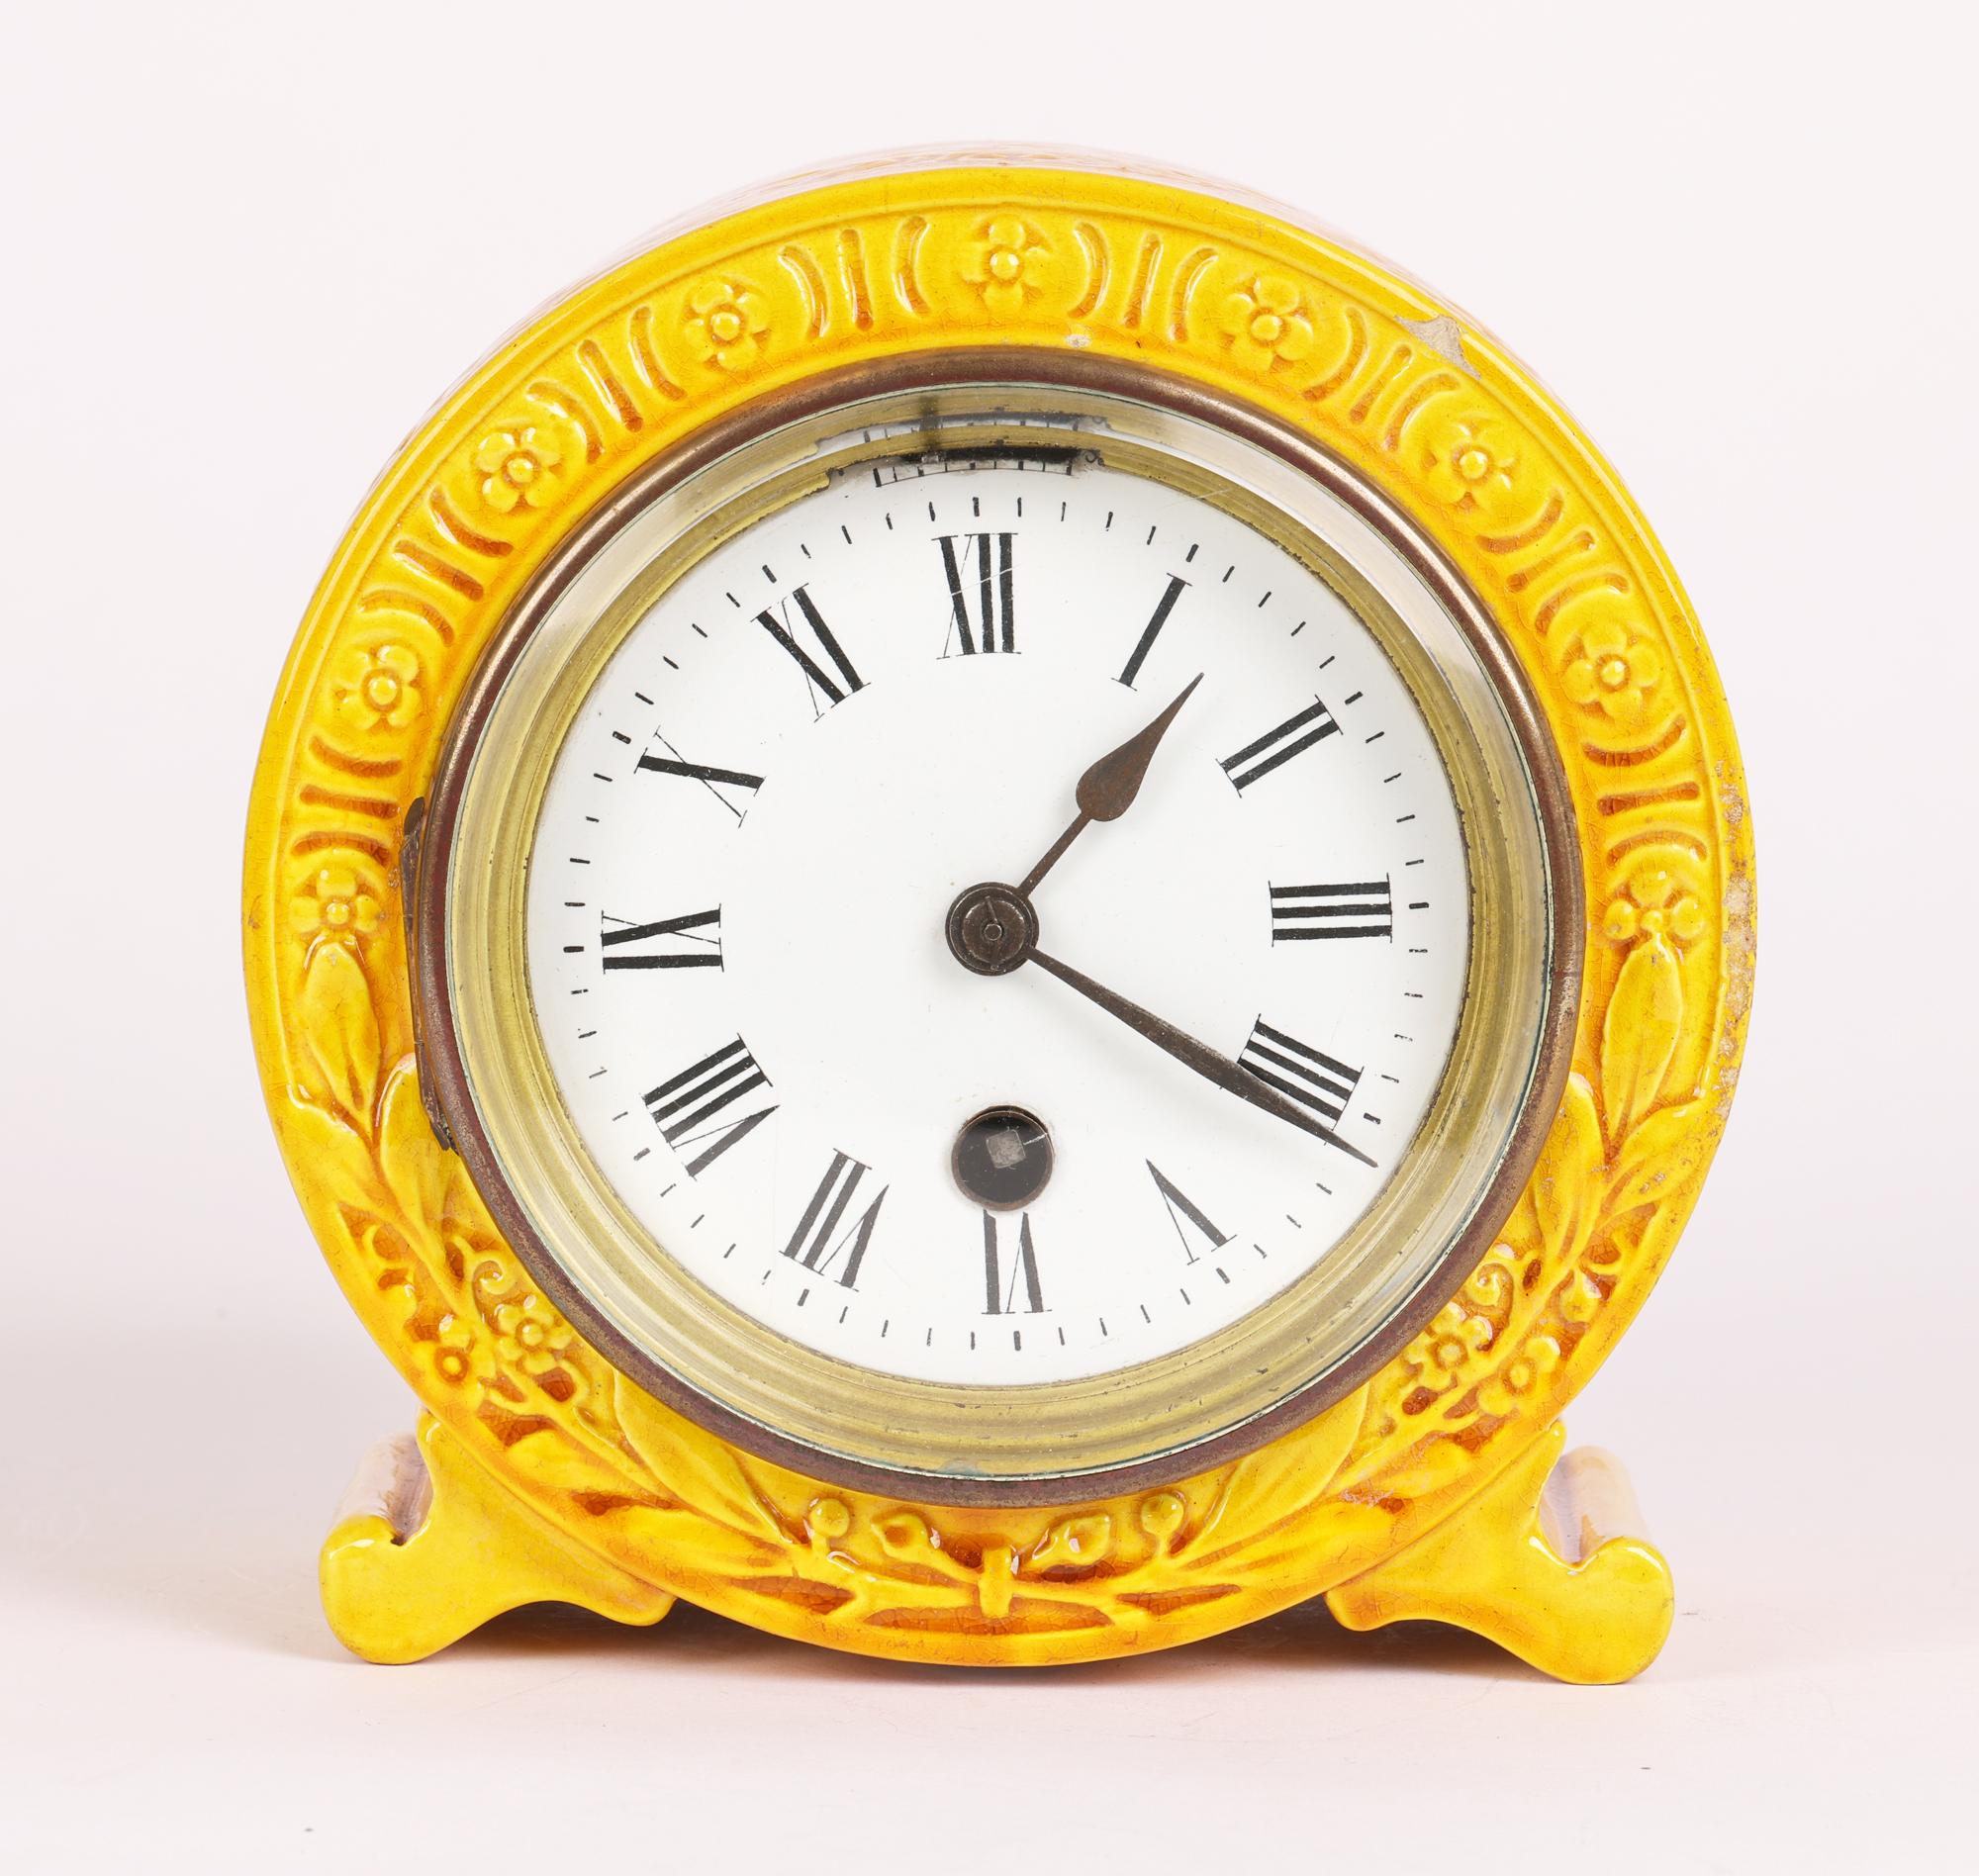 Burmantofts Faience Foliate Design Yellow Glazed Art Pottery Mantle Clock In Good Condition For Sale In Bishop's Stortford, Hertfordshire